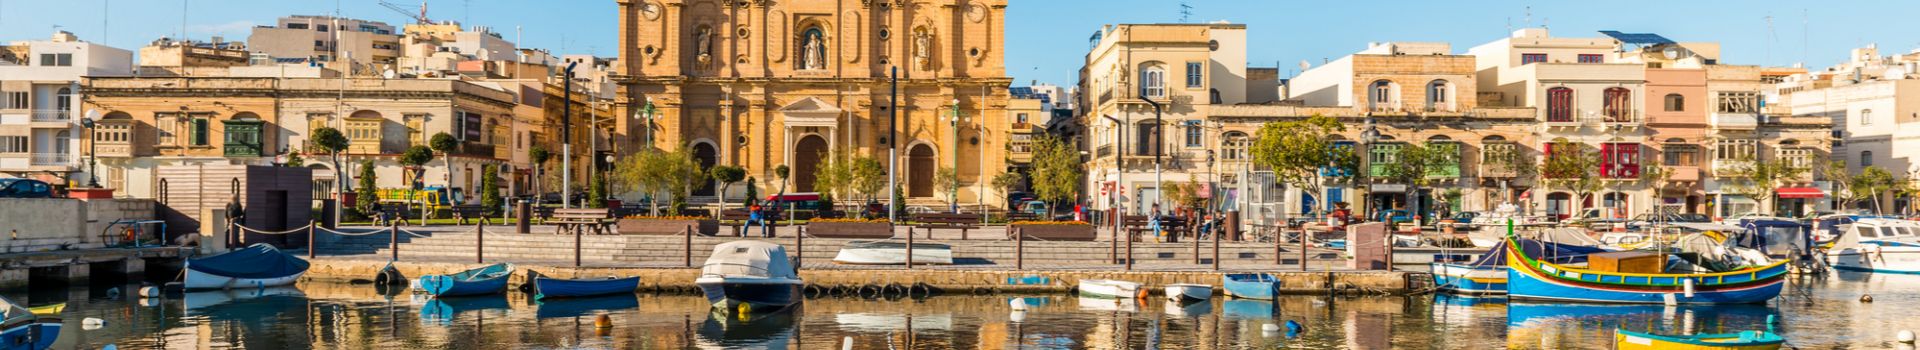 Where to stay in Malta - Malta holiday guide